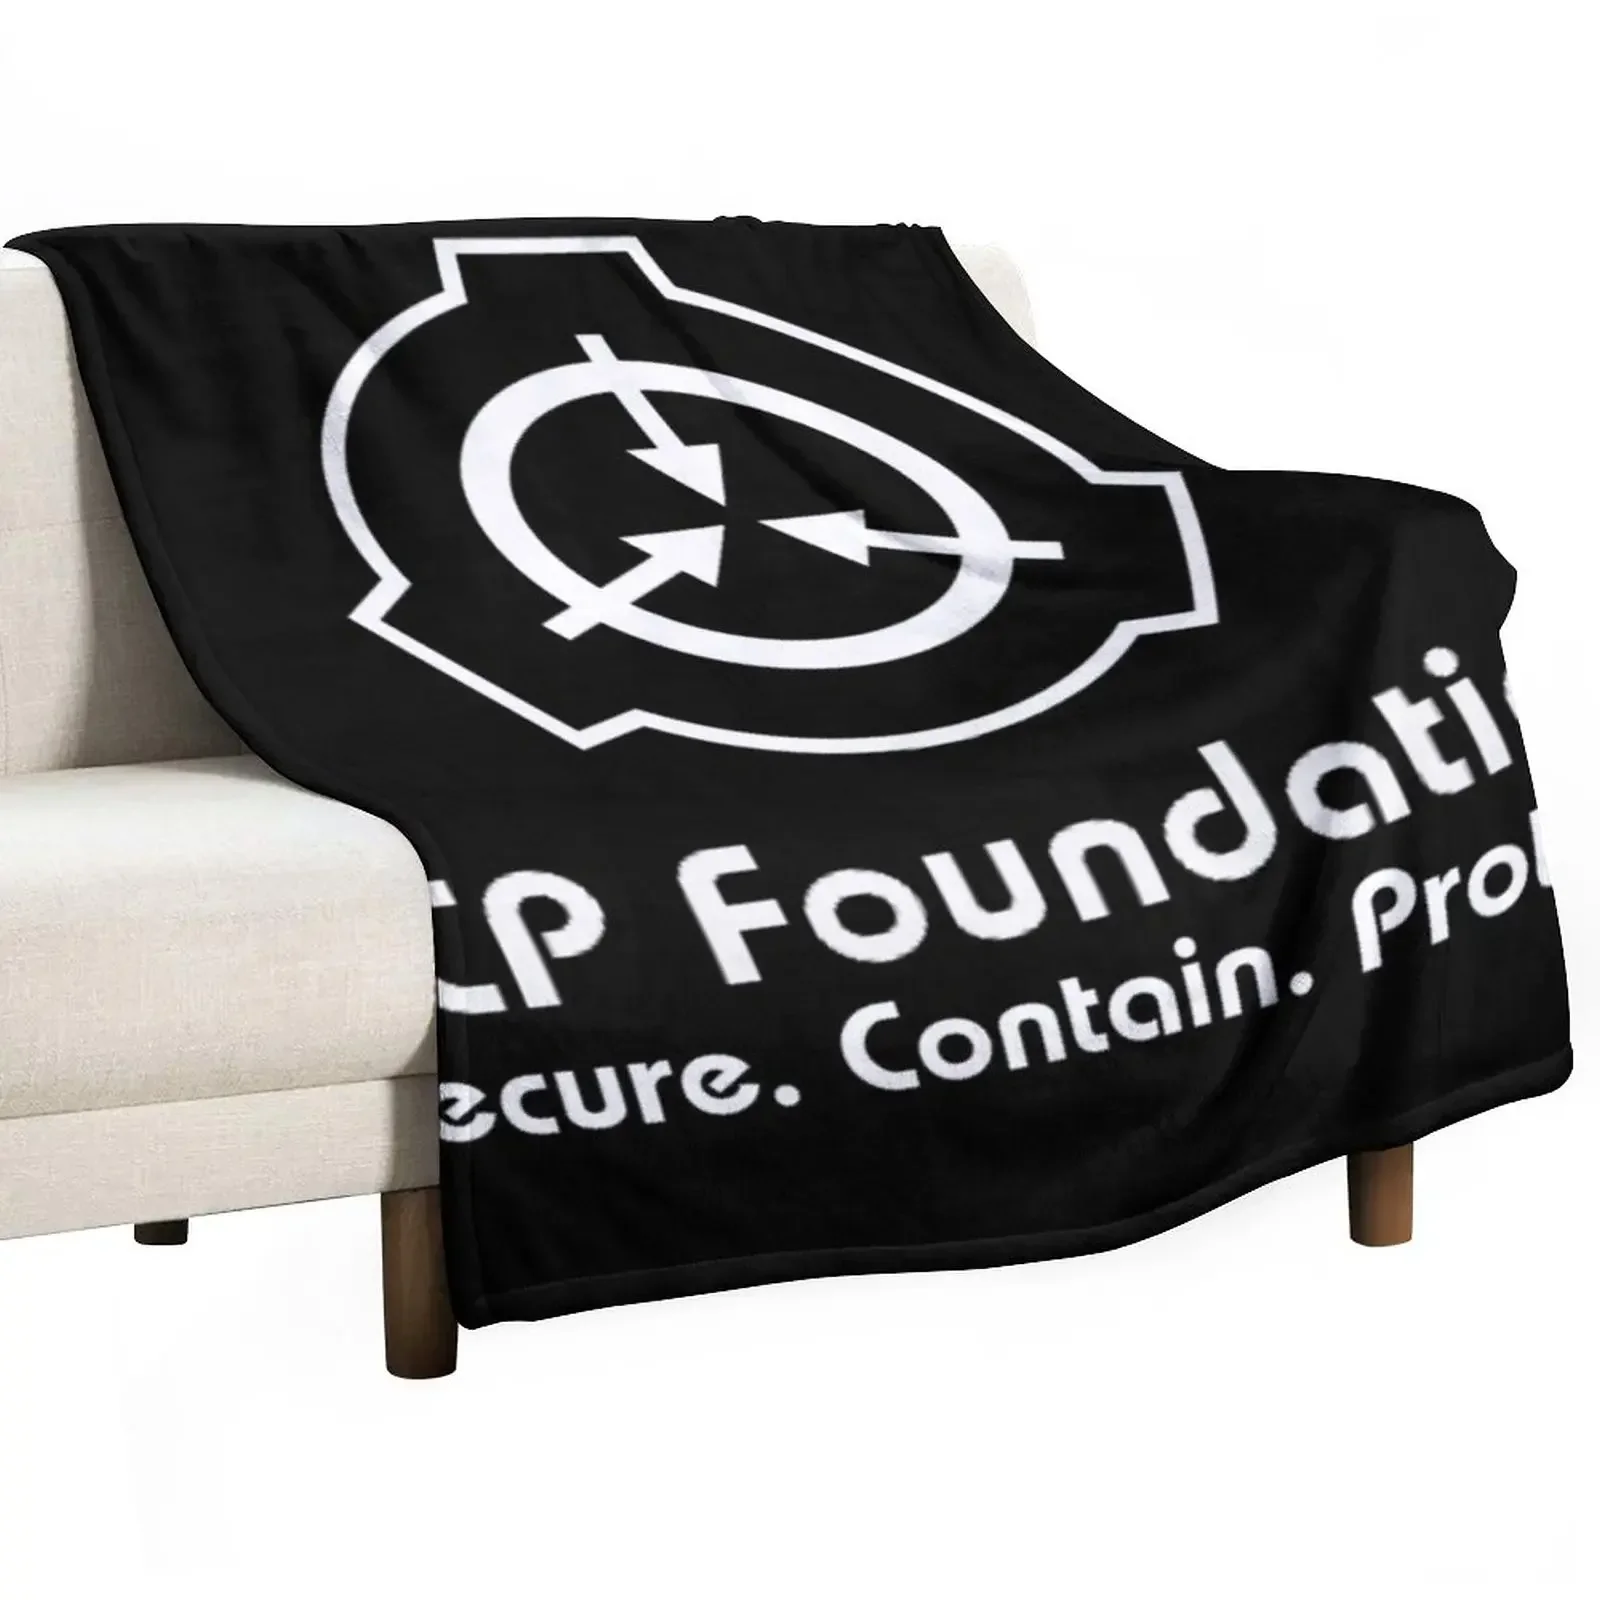 

SCP Secure. Contain. Protect (Black) Throw Blanket Extra Large Throw wednesday Baby Blankets